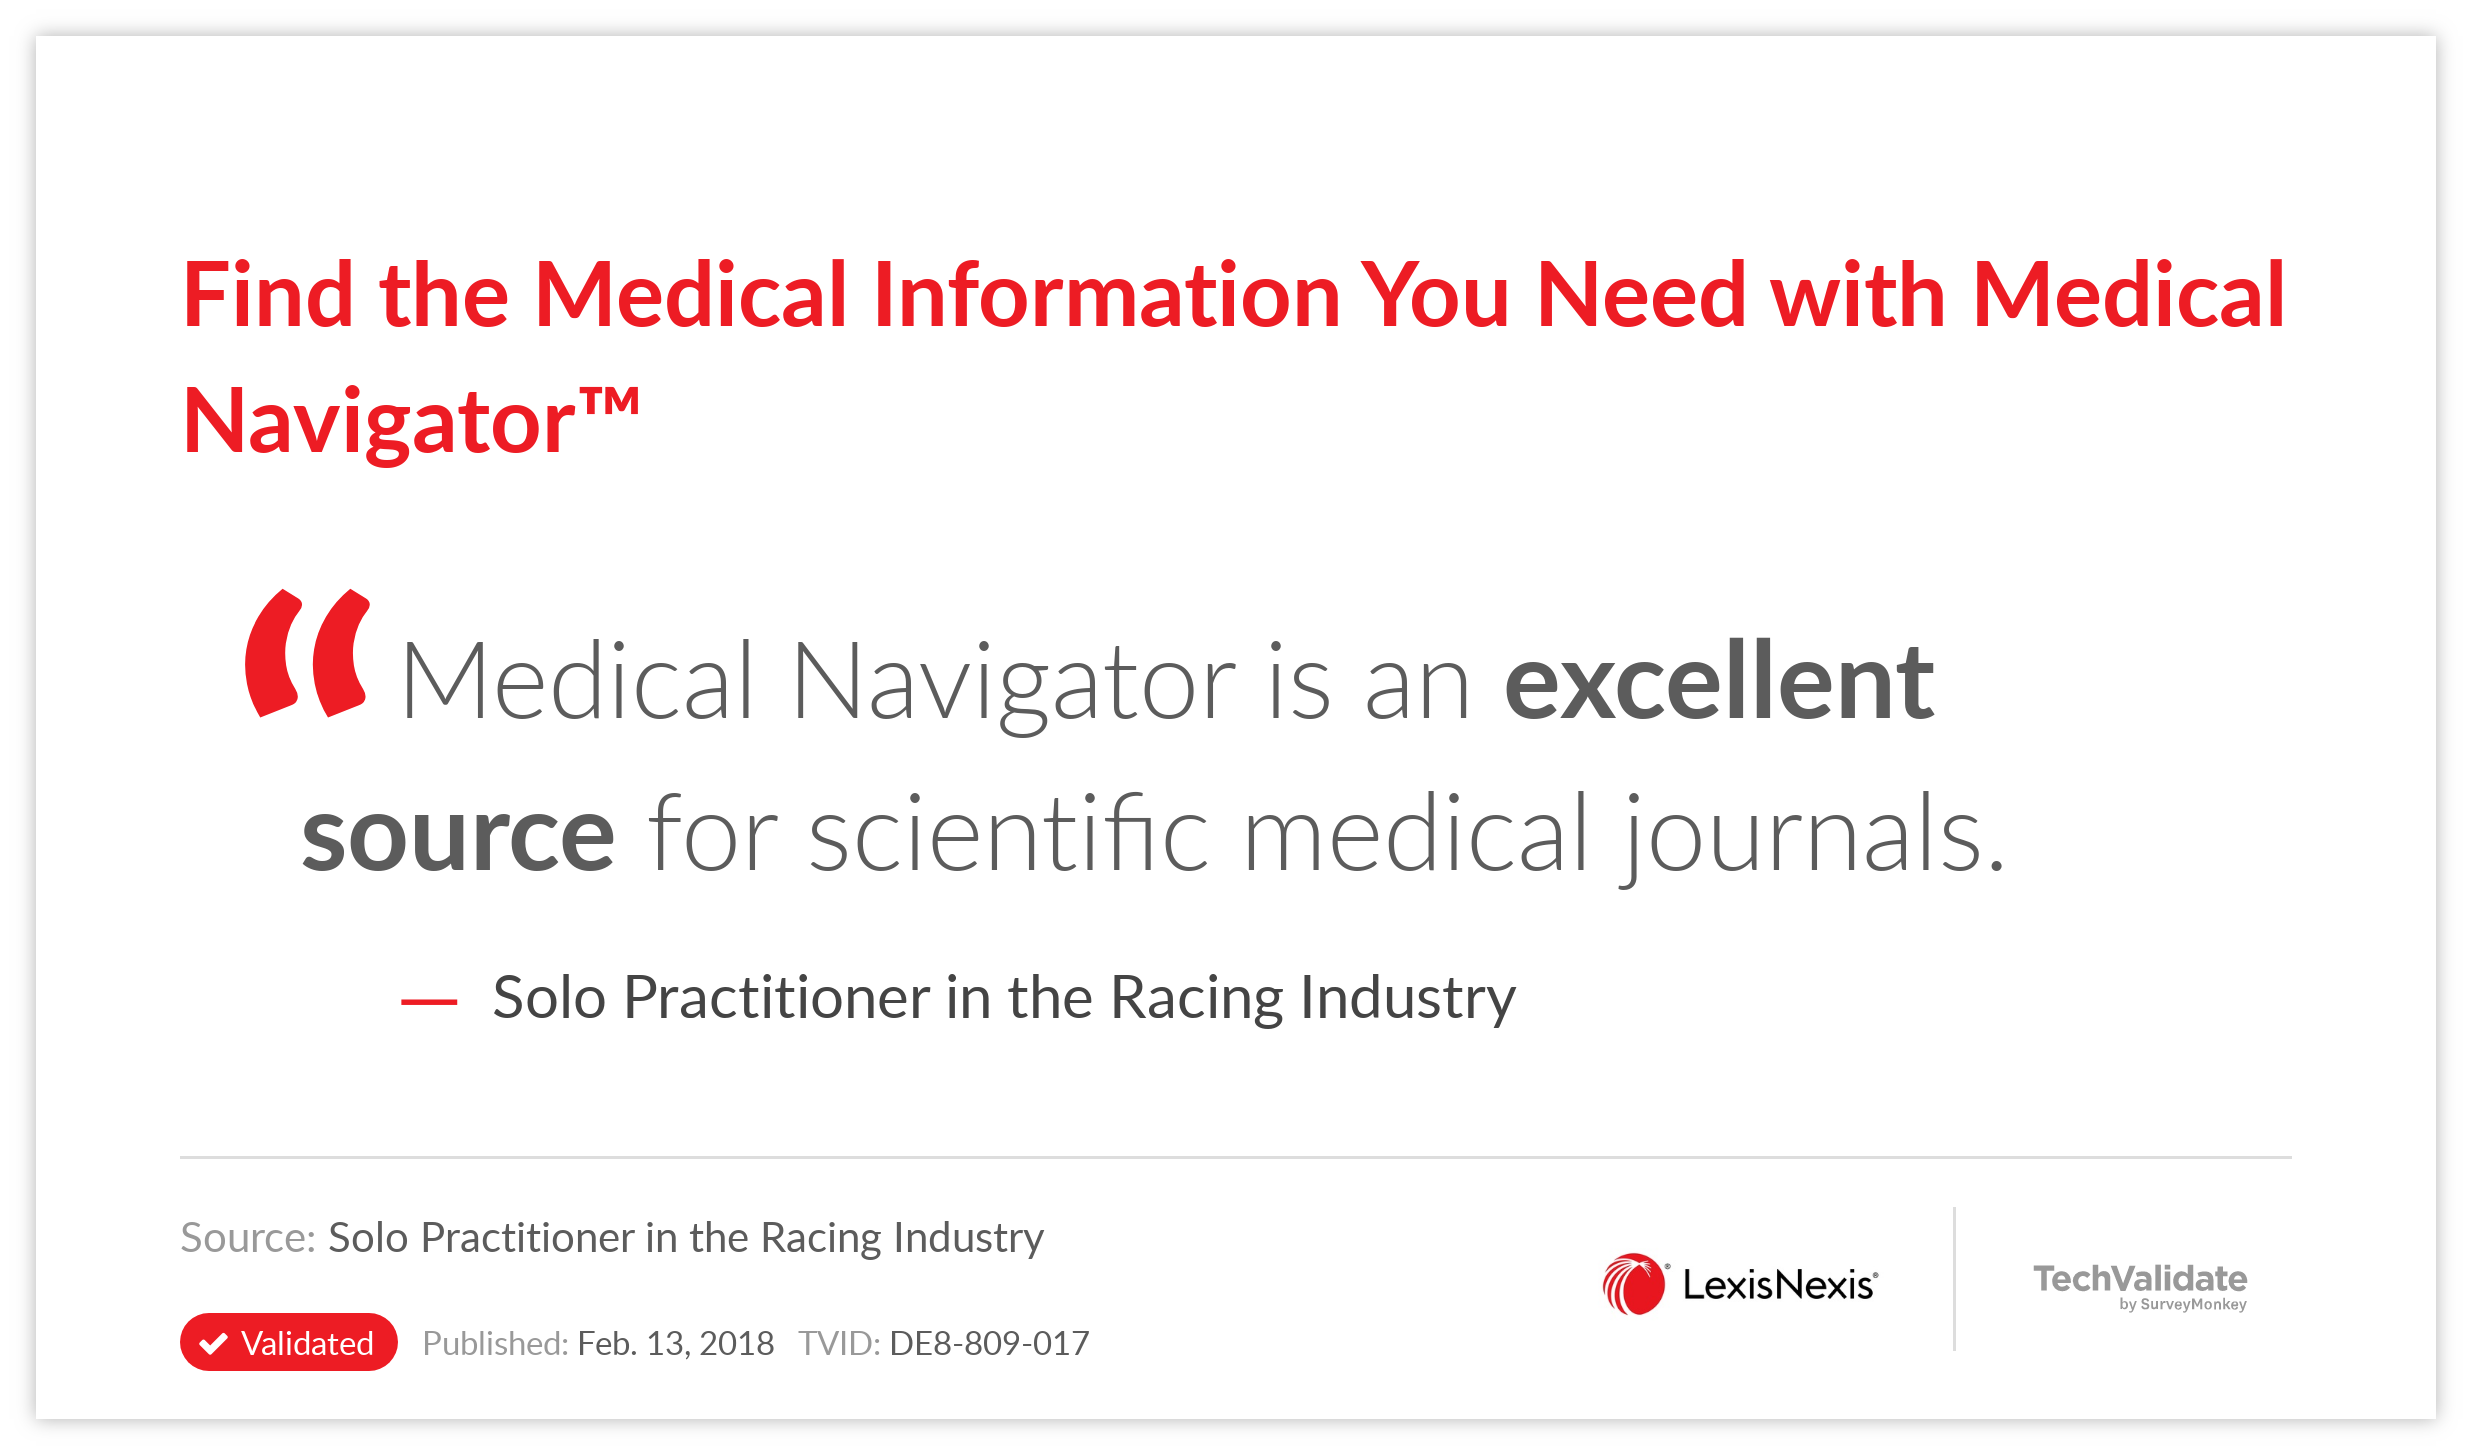 Find the Medical Information You Need with Medical Navigator(TM)